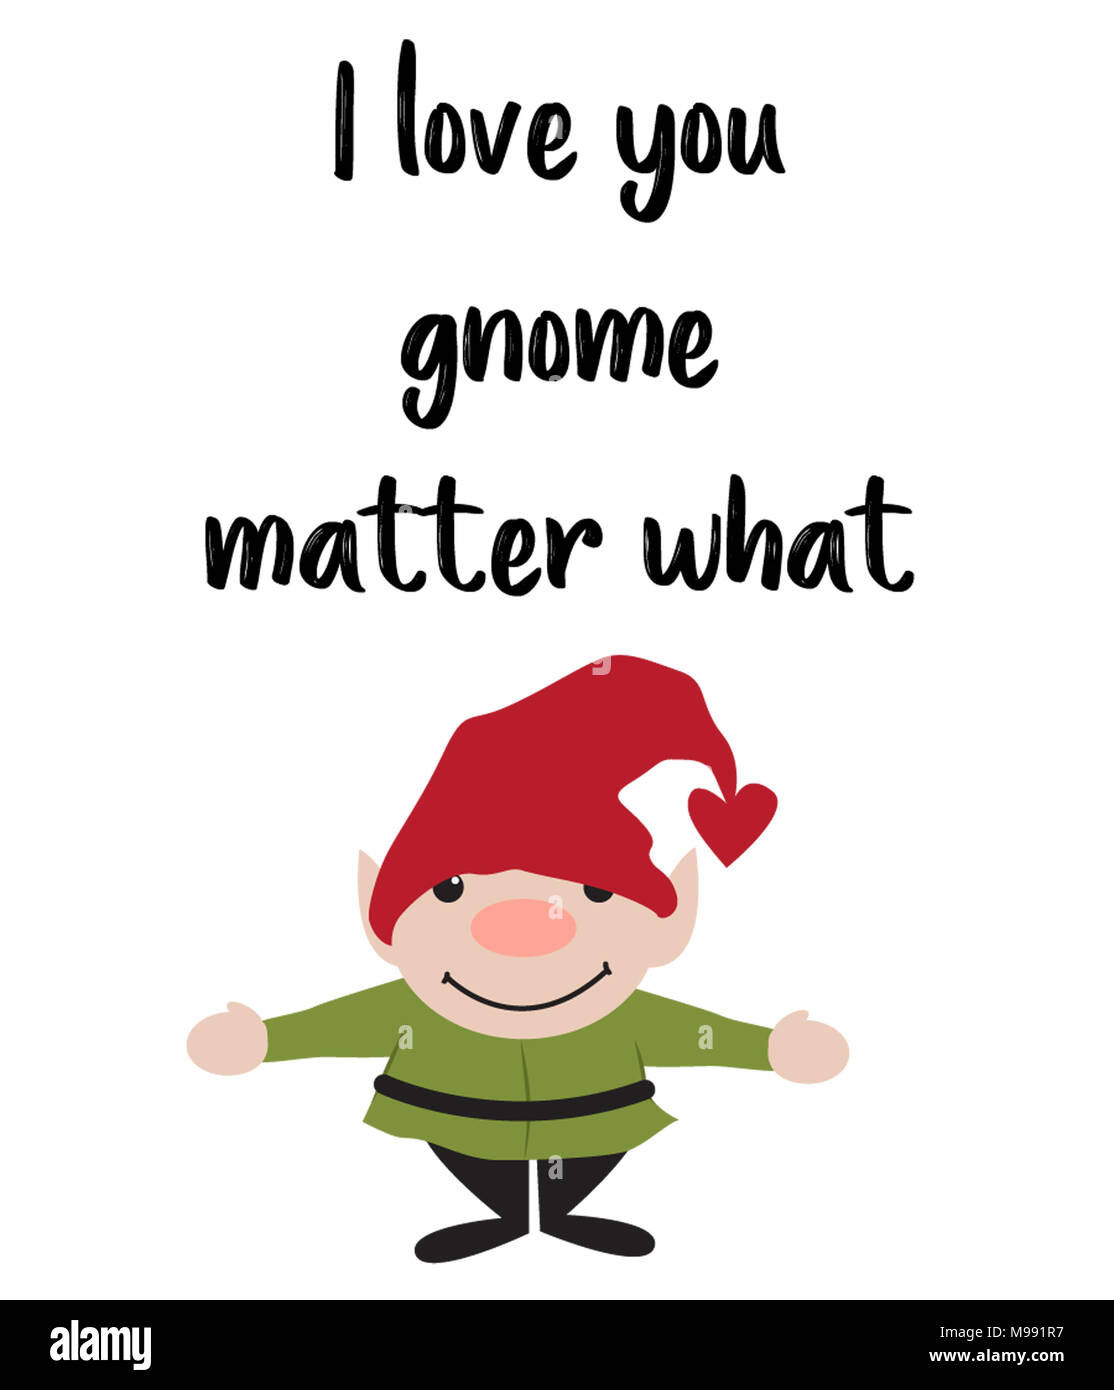 I love you gnome matter what Stock Photo